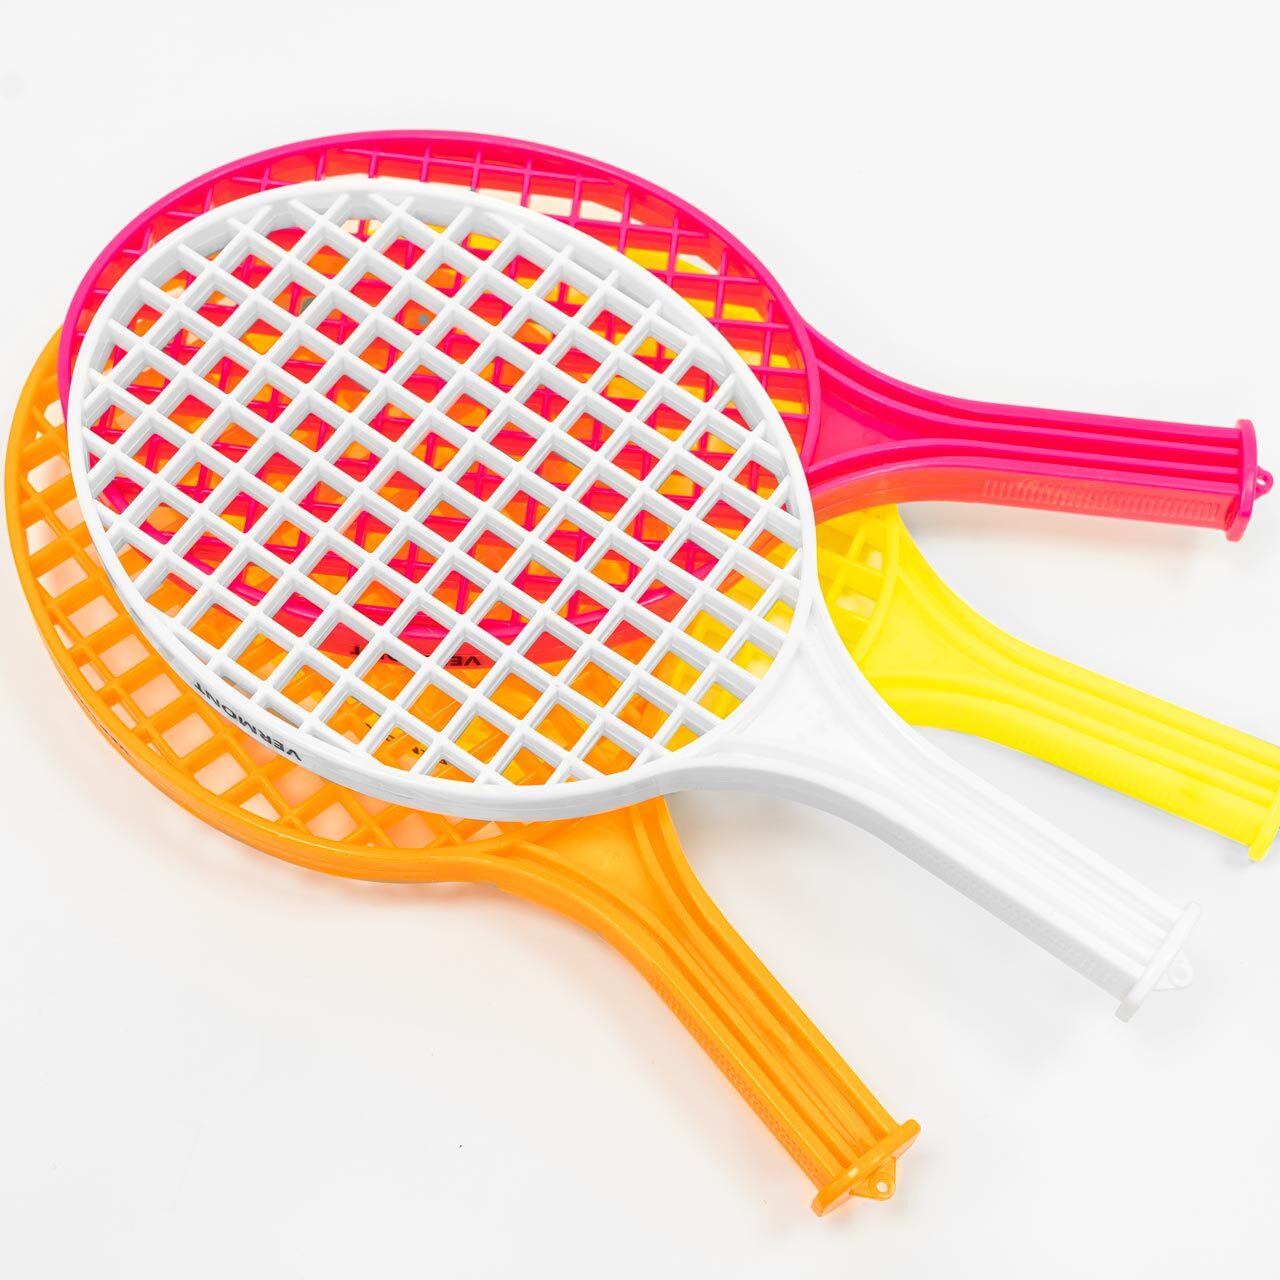 Vermont Kids Tennis Racket Sets[Pack of 4]